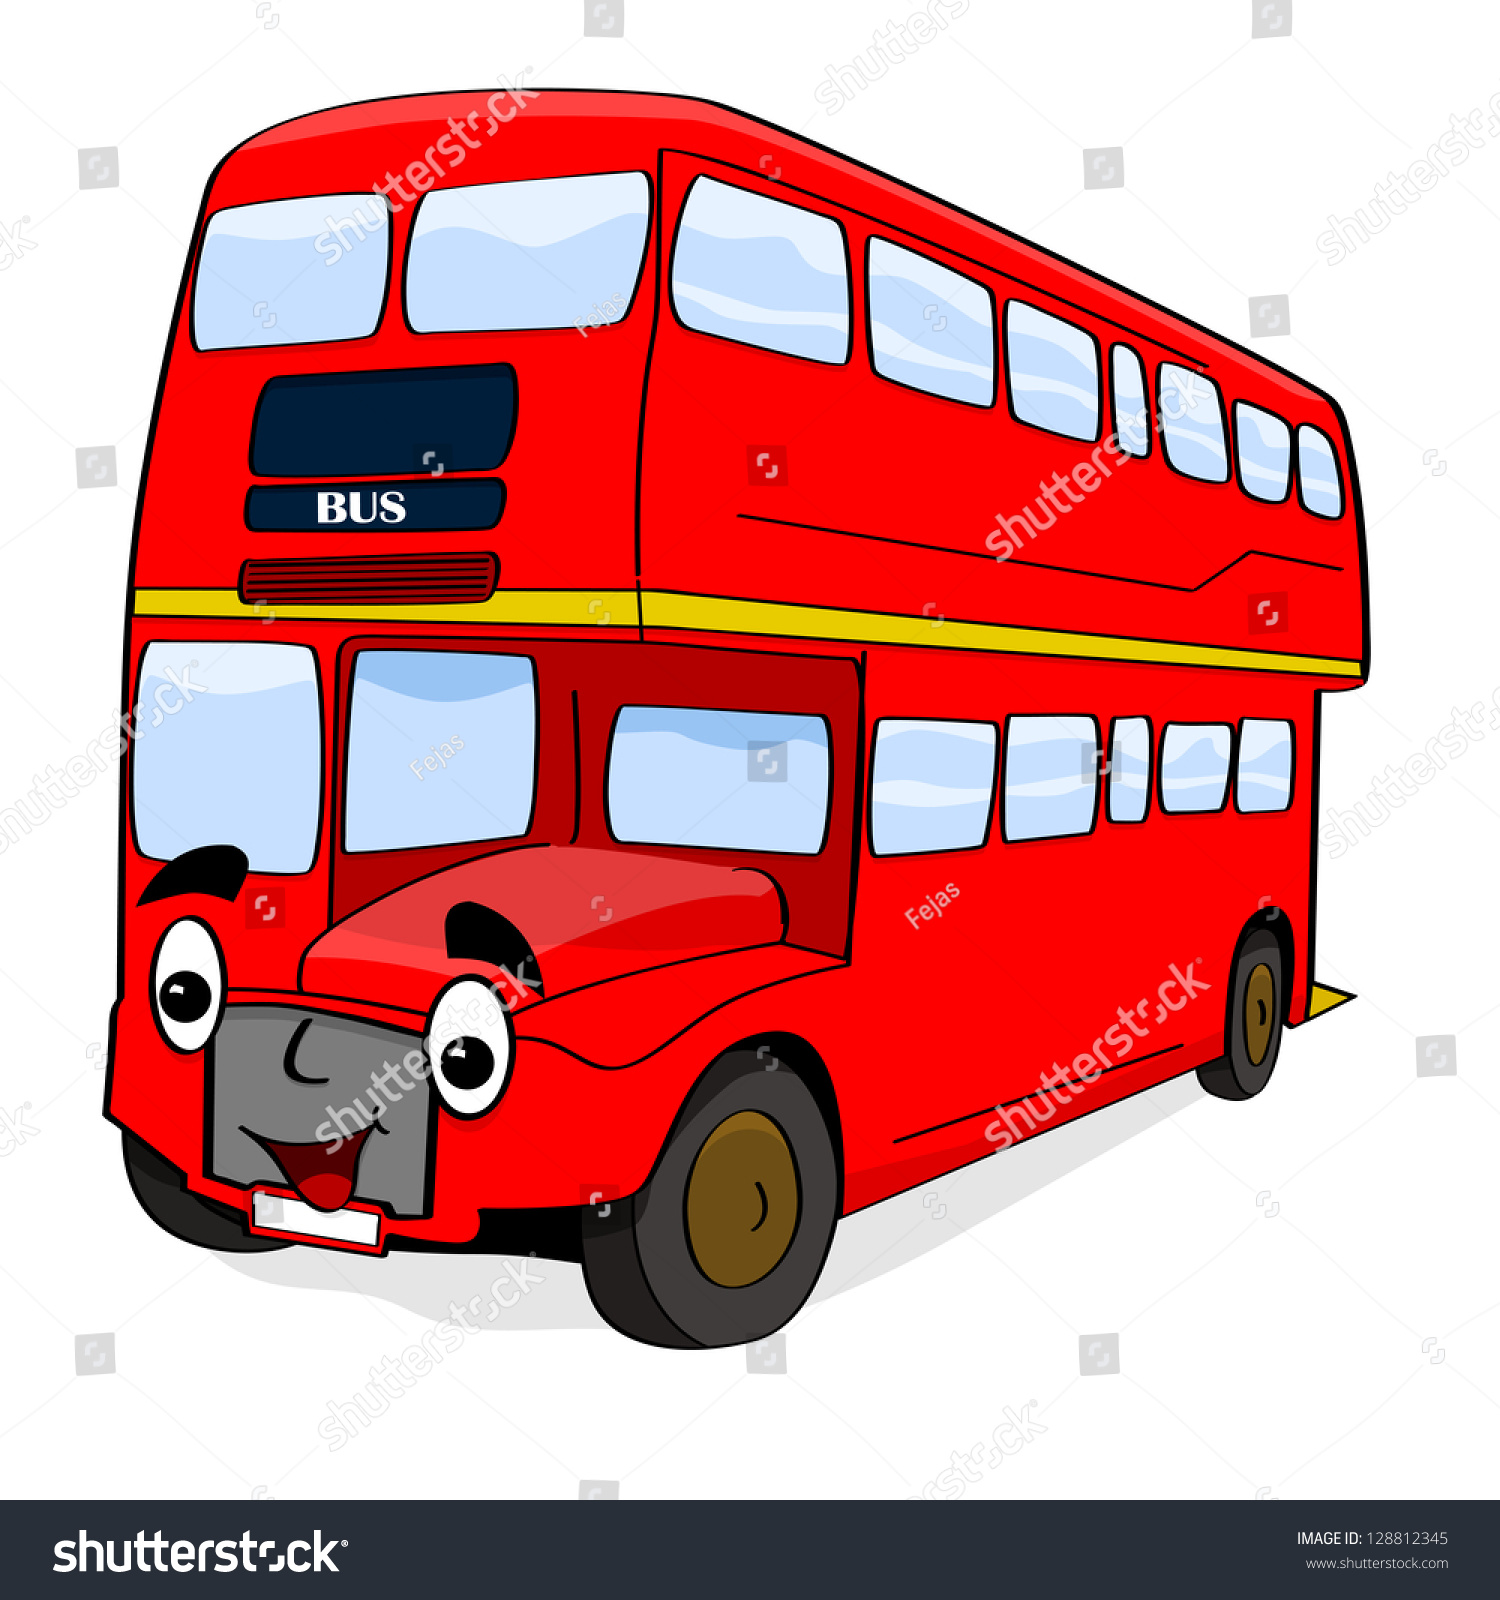 clipart red bus - photo #32